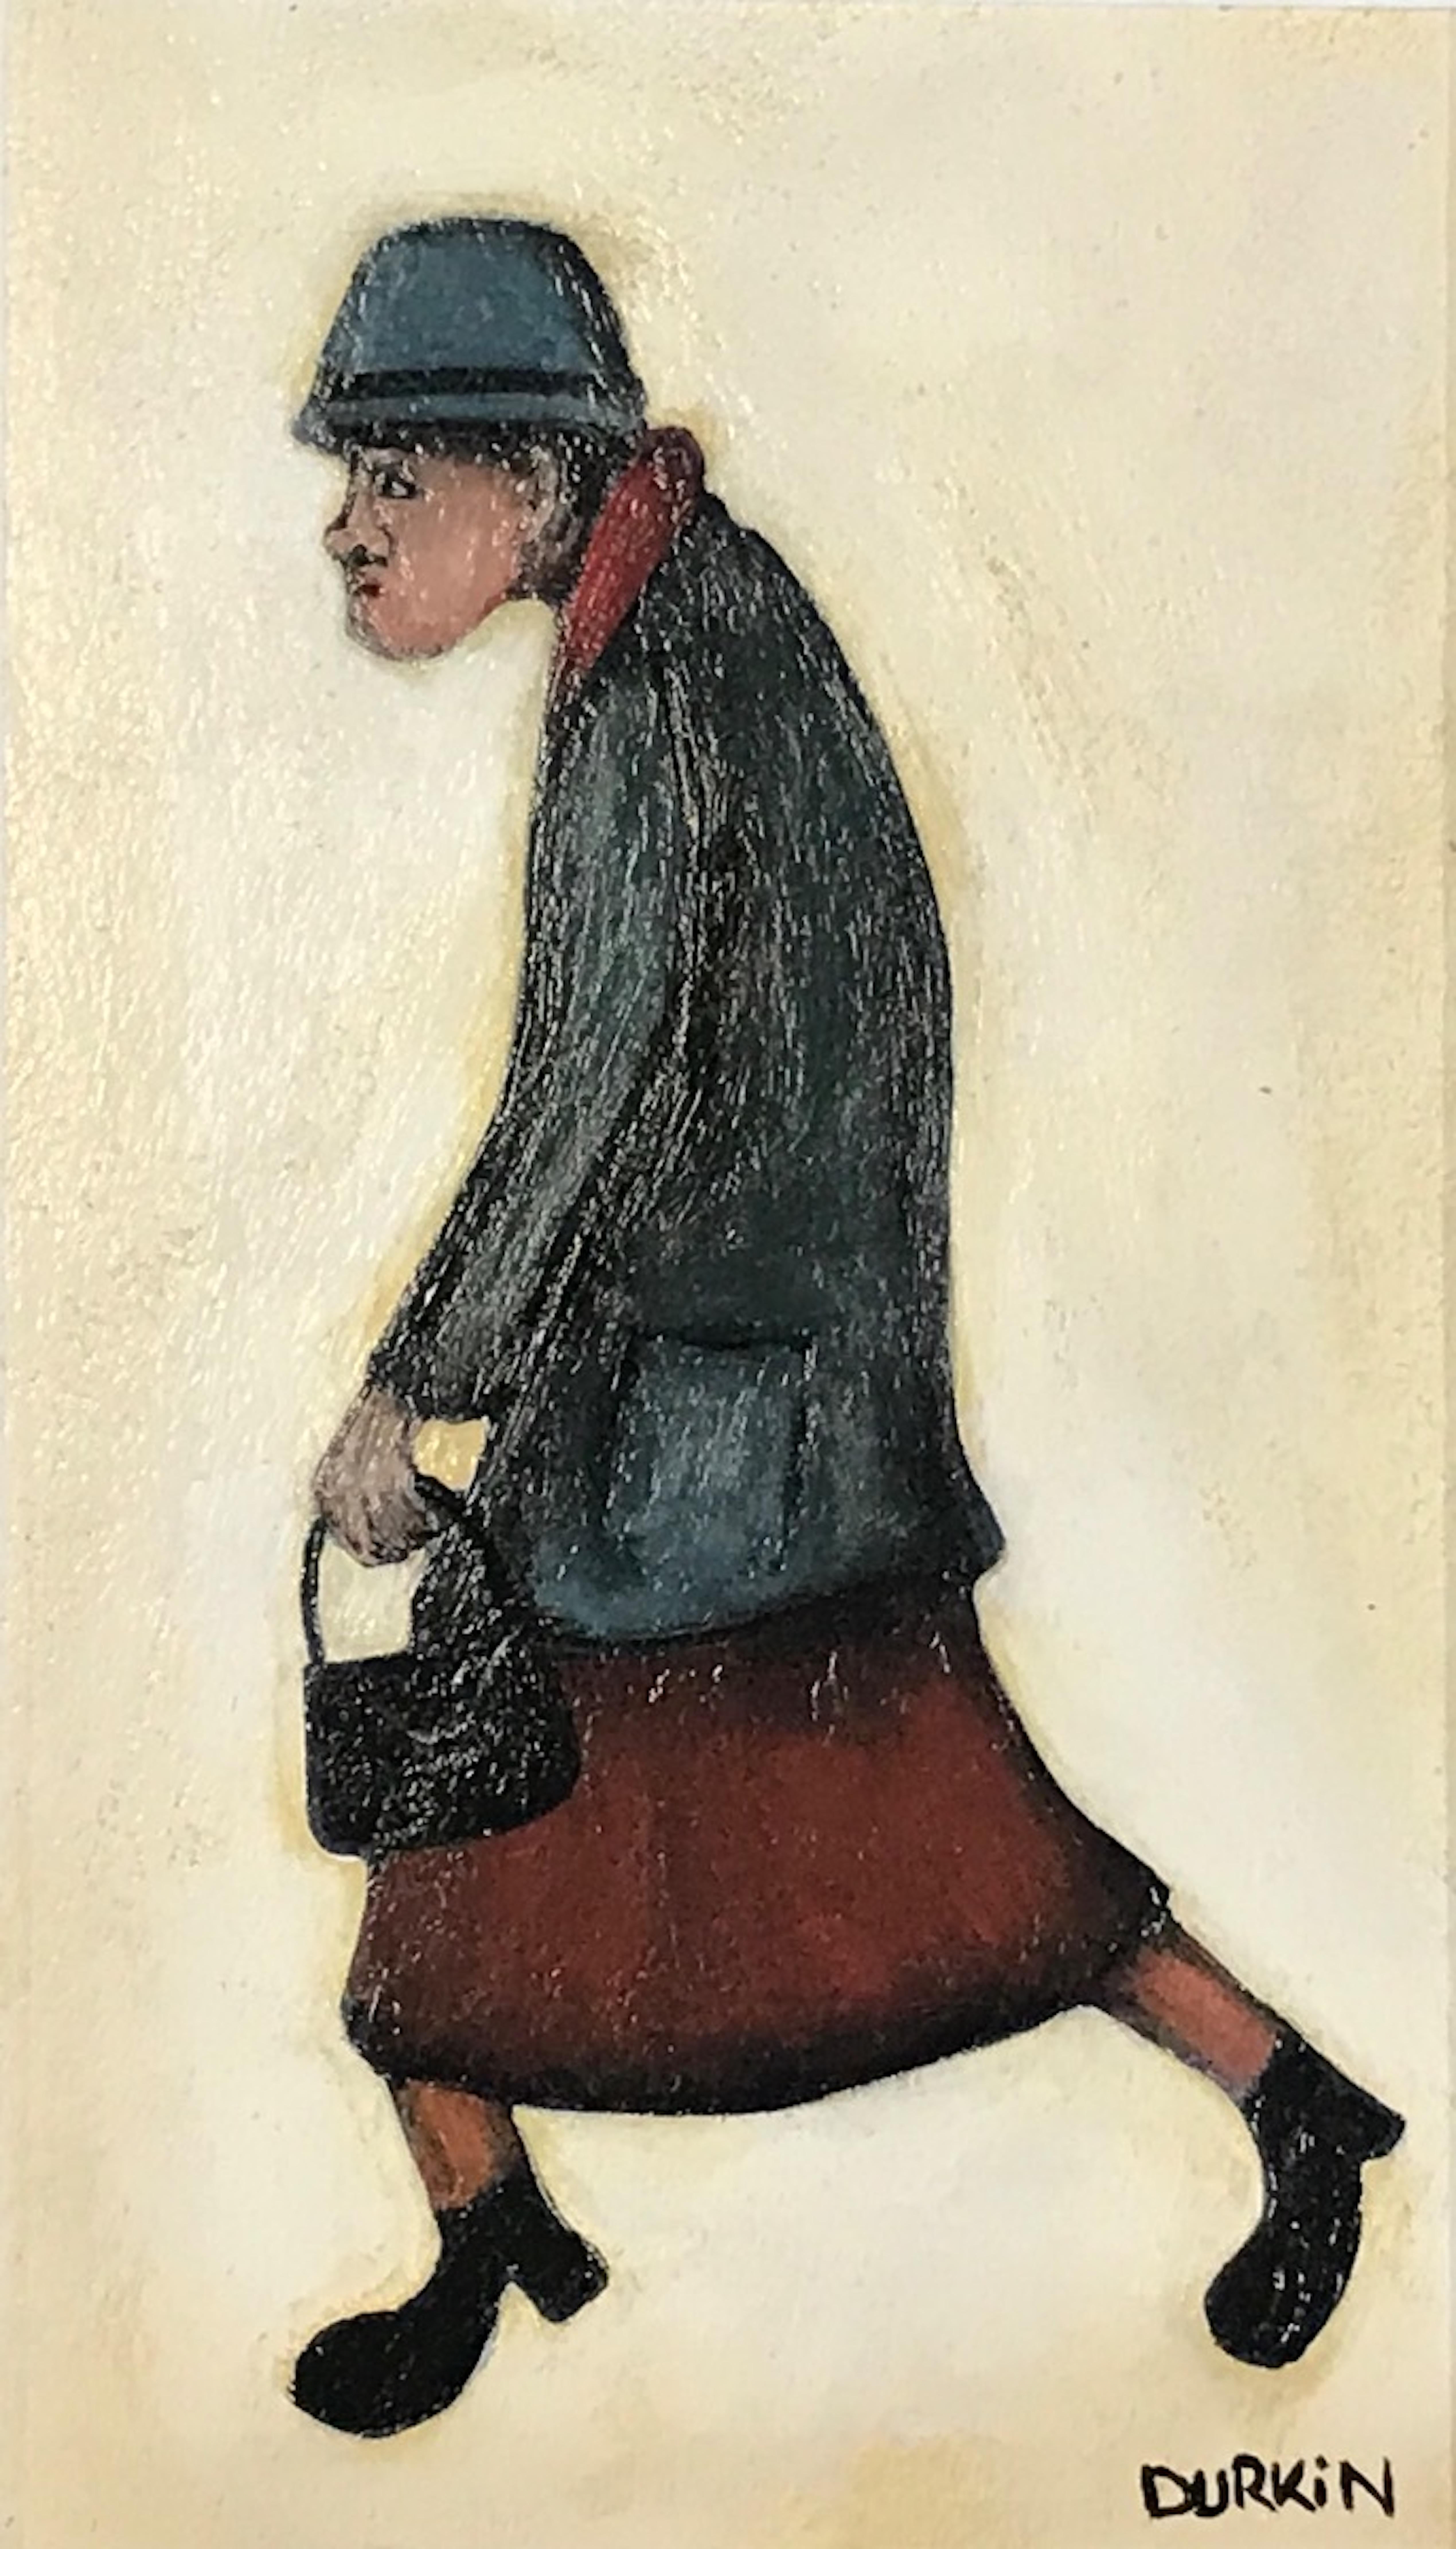 original paiting of Lady on a walk by Sean Drukin. Sean uses very toned colours but draws attention to her red scarf and red skirt.

ADDITIONAL INFORMATION:
Acrylic paint on Canvas
39.5 H x 30 W x 5 D cm (15.55 x 11.81 x 1.97 in)
Sold framed

Image